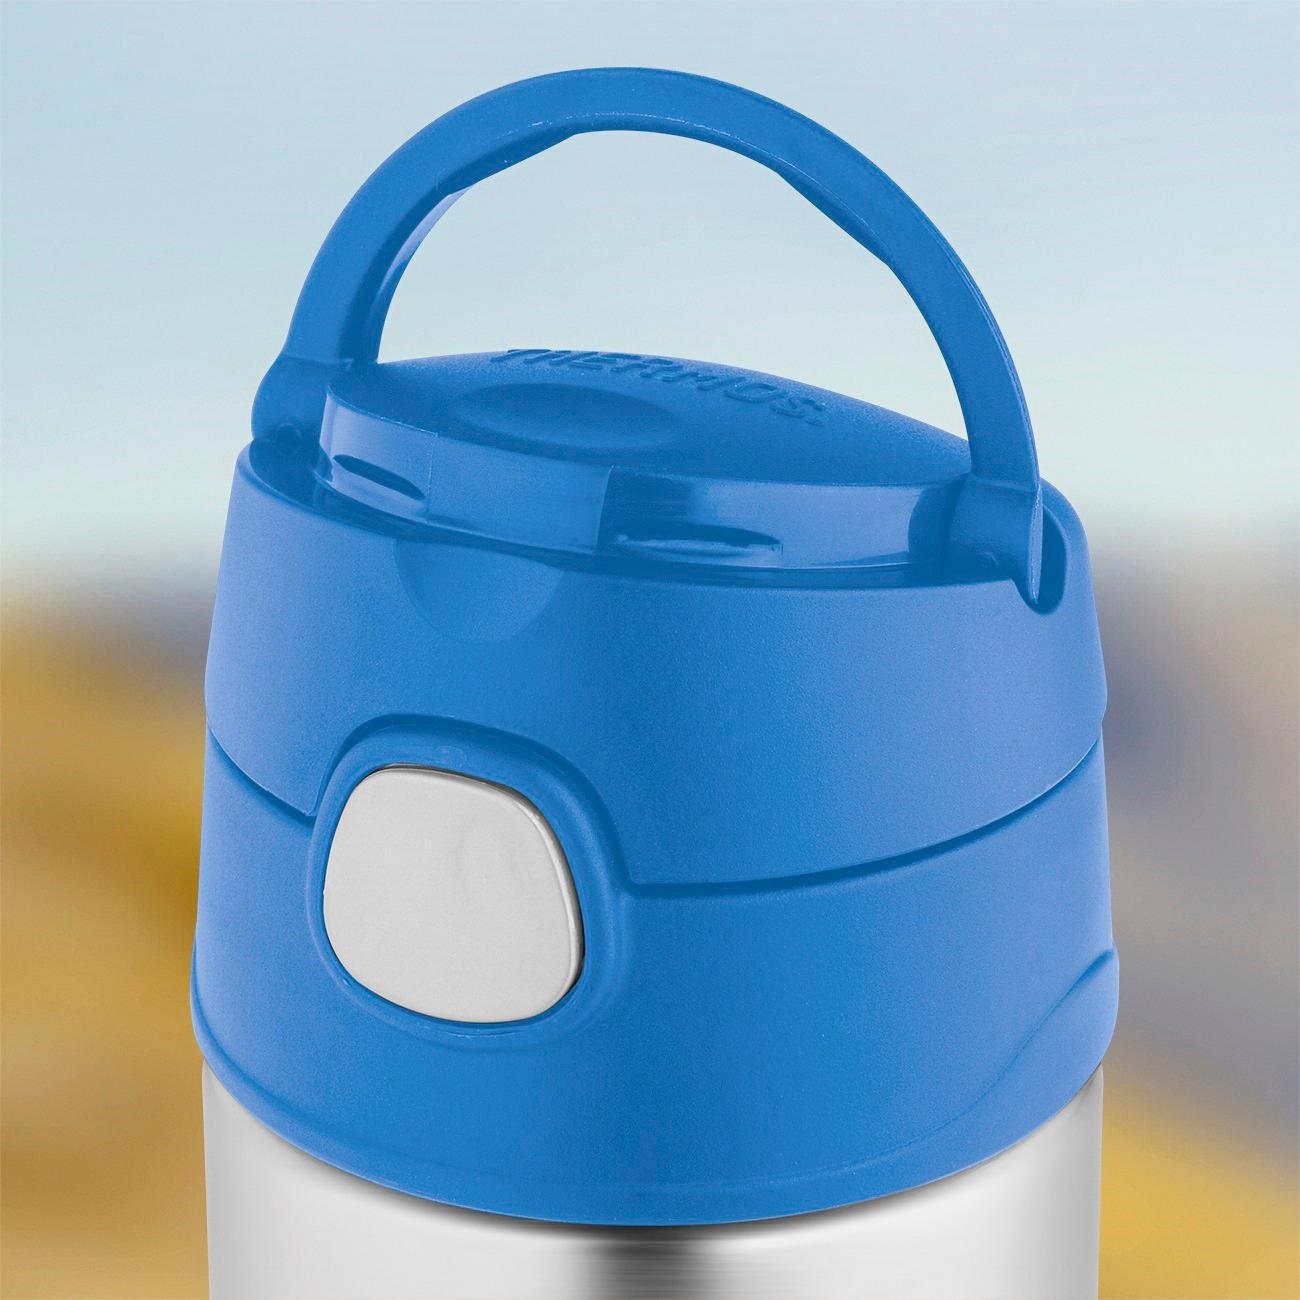 Thermos 12 Oz. Kid's Funtainer Insulated Water Bottle - Paw Patrol